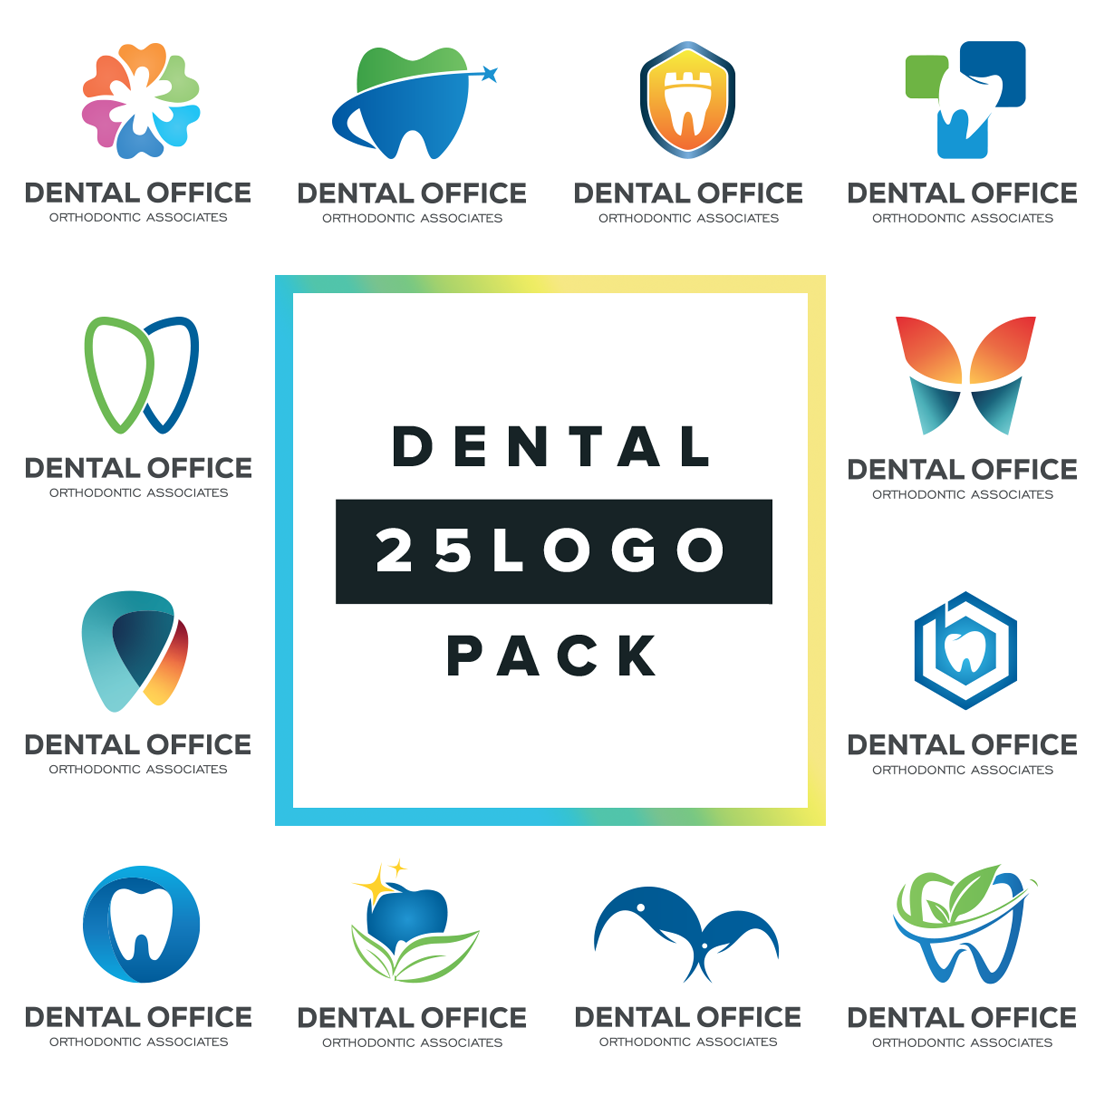 Dental Clinic Logo Pack Collection Part 1 cover image.